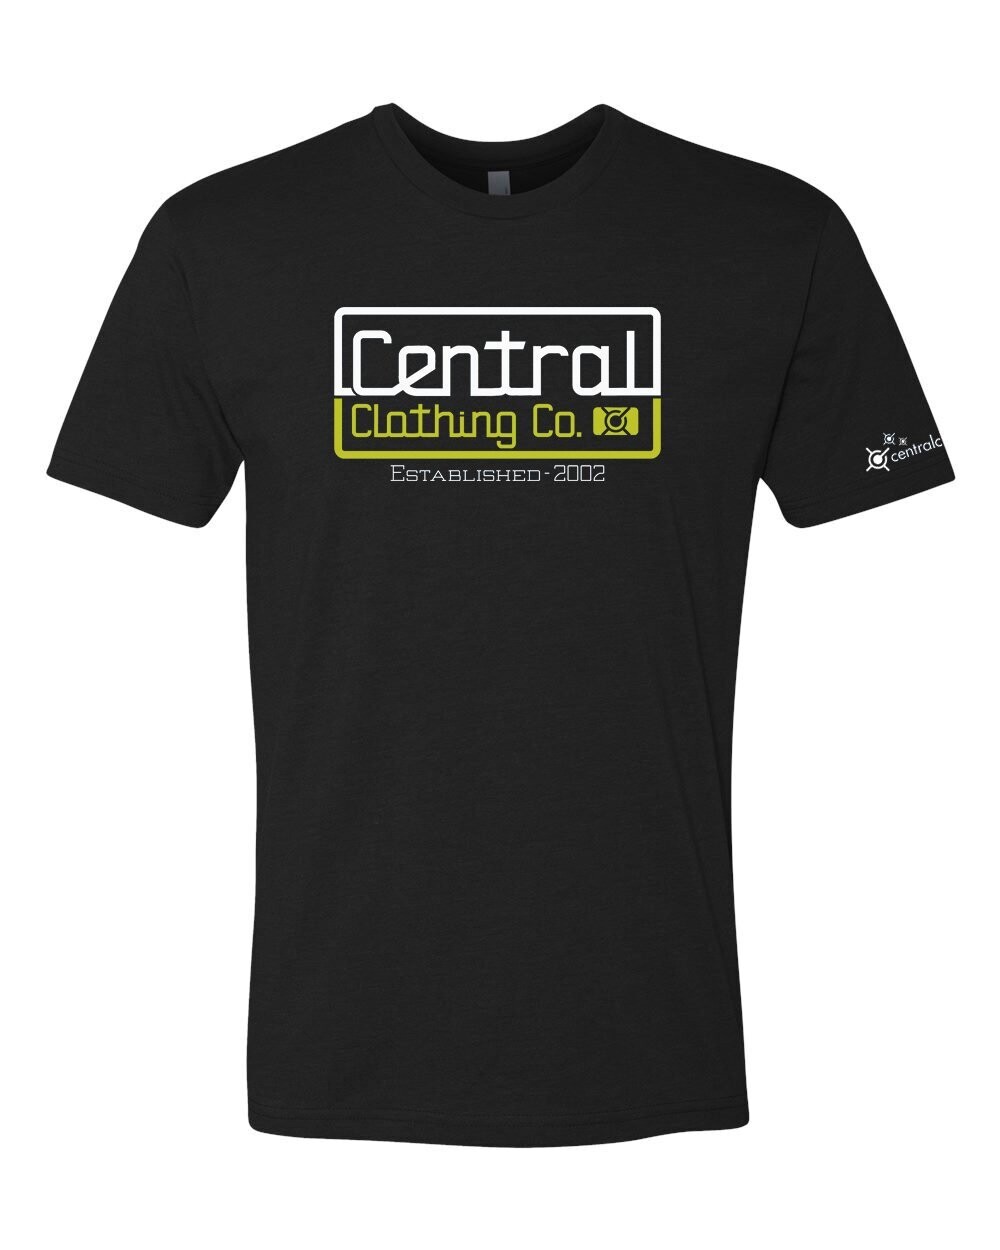 Central Clothing Co - Connections Tee - Black